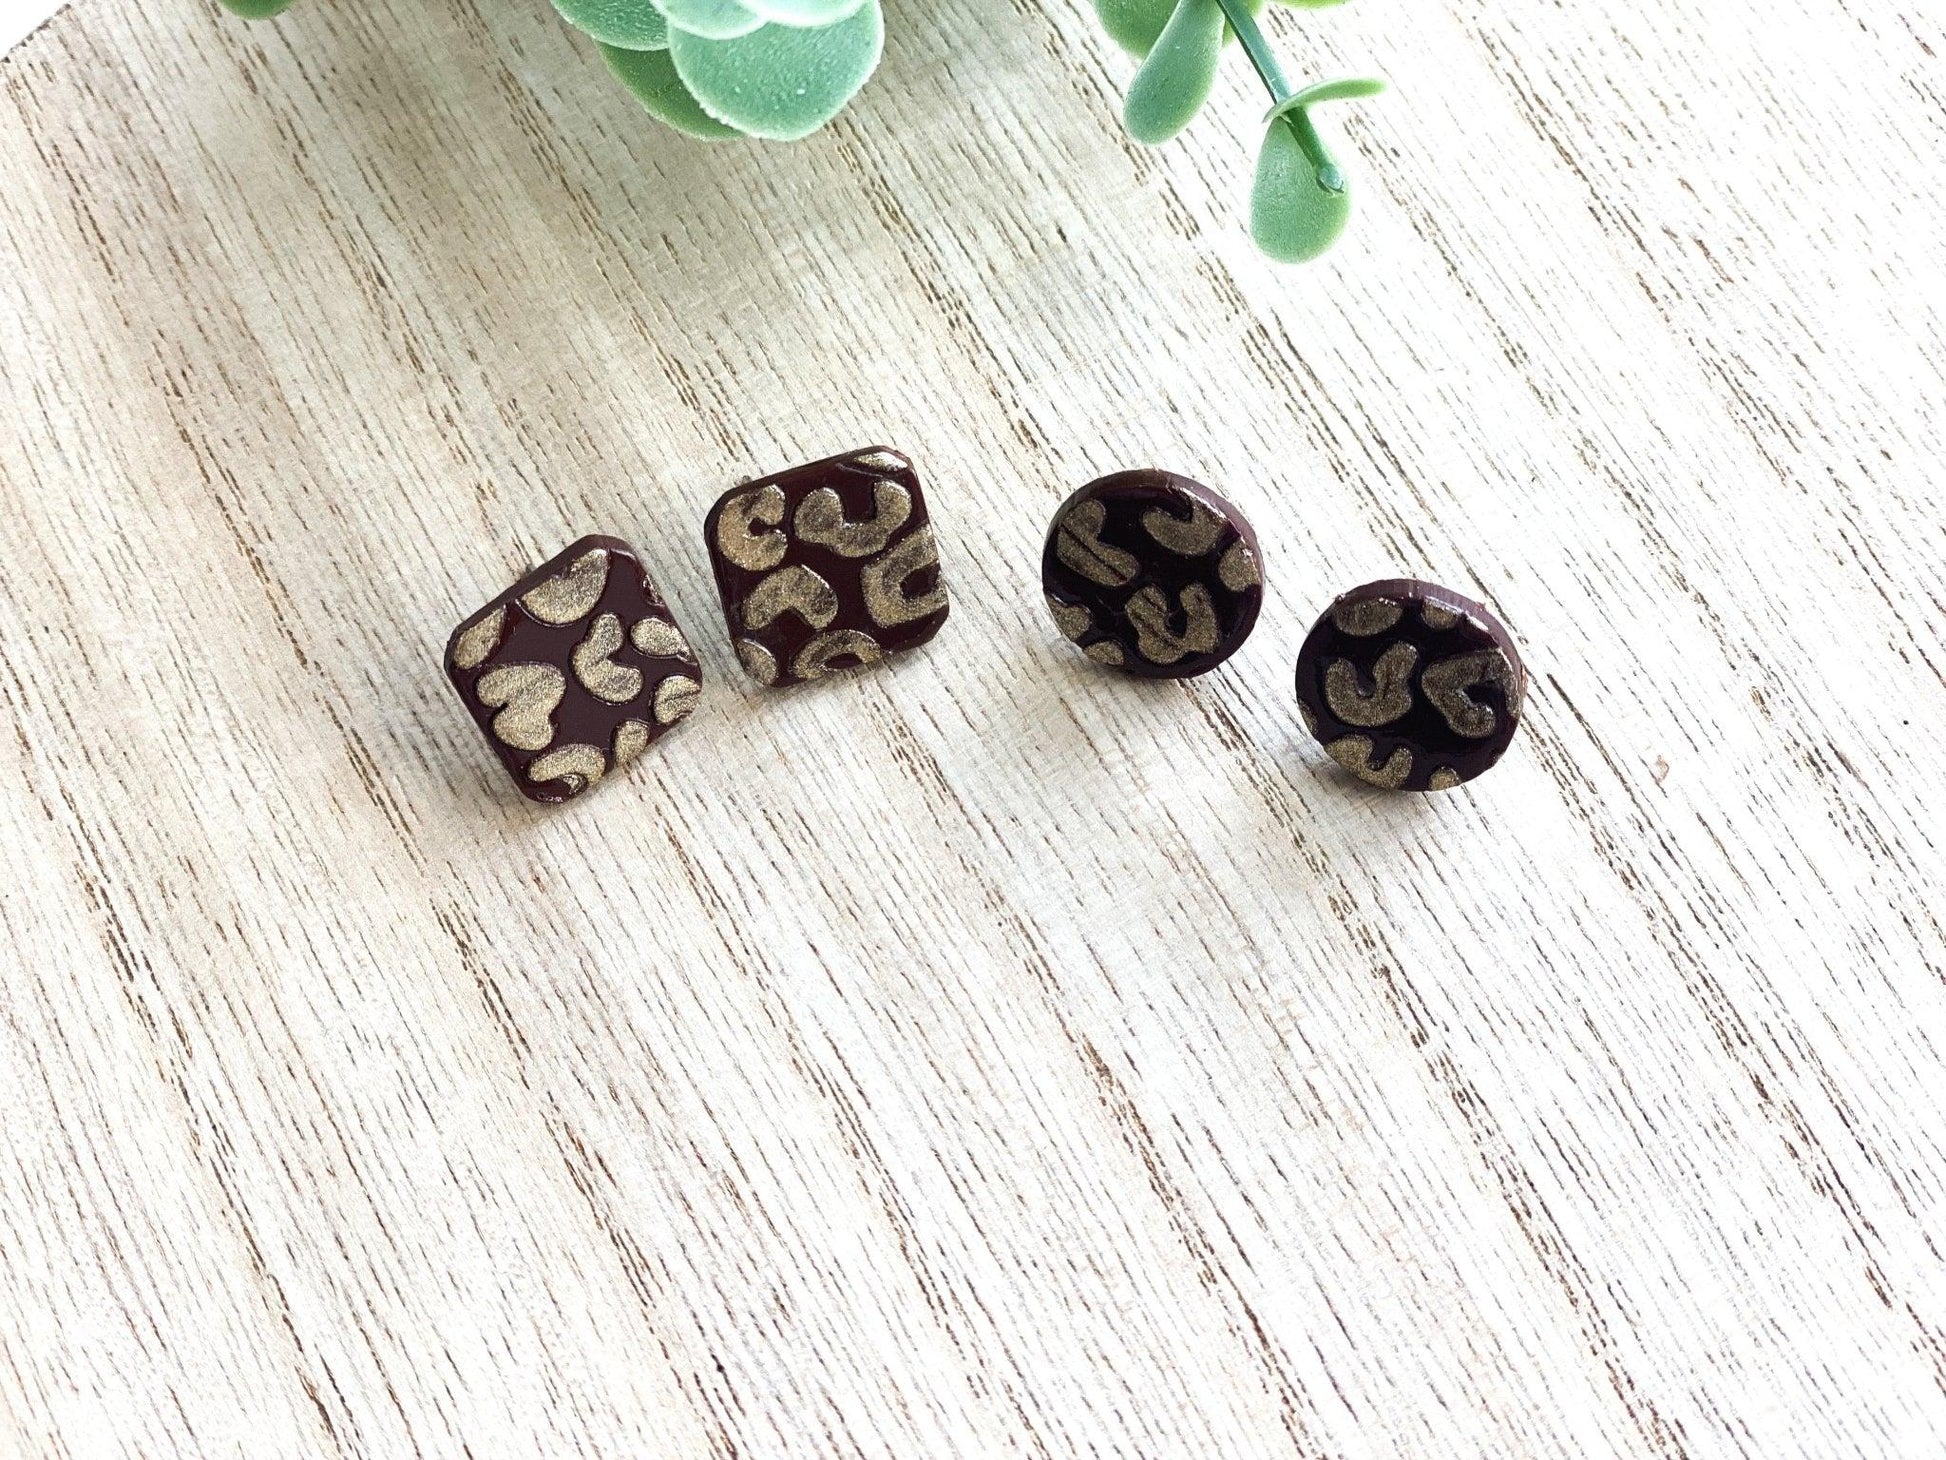 Unleash Your Wild Side: Chic Leopard Print Stud Earrings – Perfect for Fashionable & Sensitive Ears! - Harbor to Gulf Co.